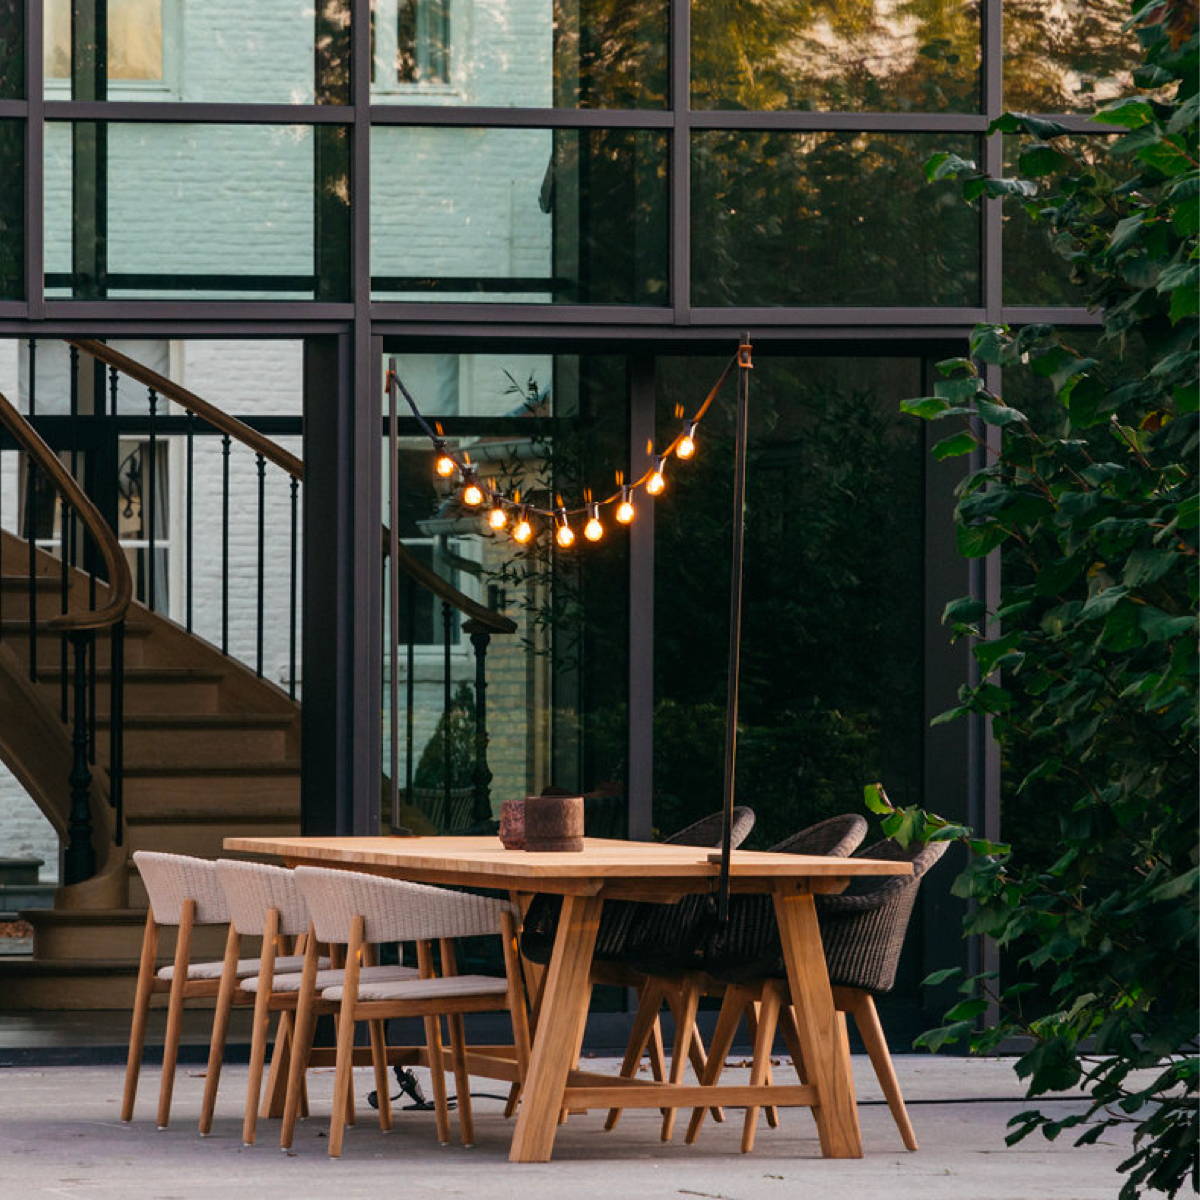 Six Mona dining chairs set at a wooden outdoor dining table under a string of lights.